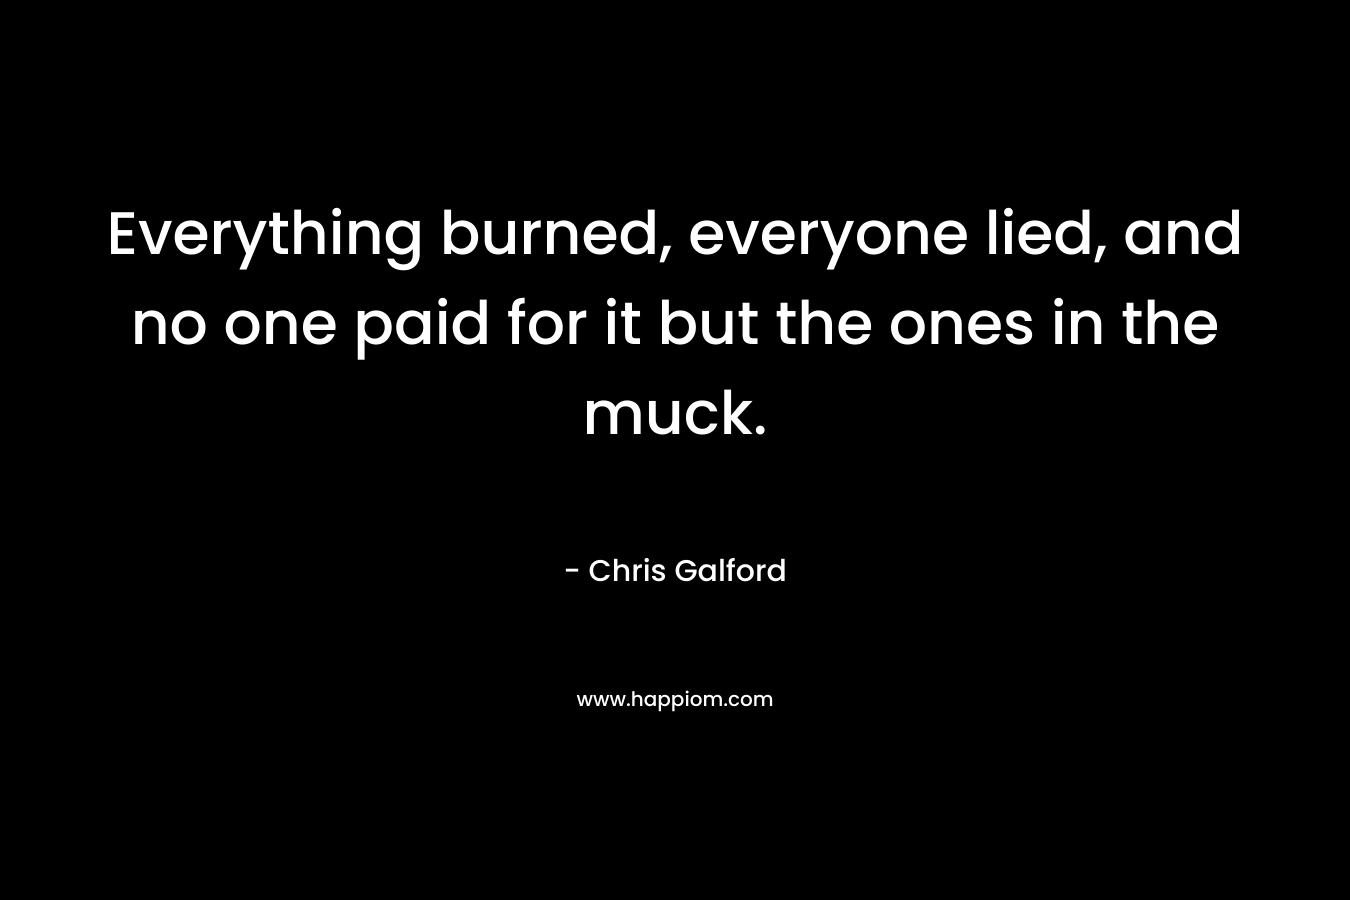 Everything burned, everyone lied, and no one paid for it but the ones in the muck.